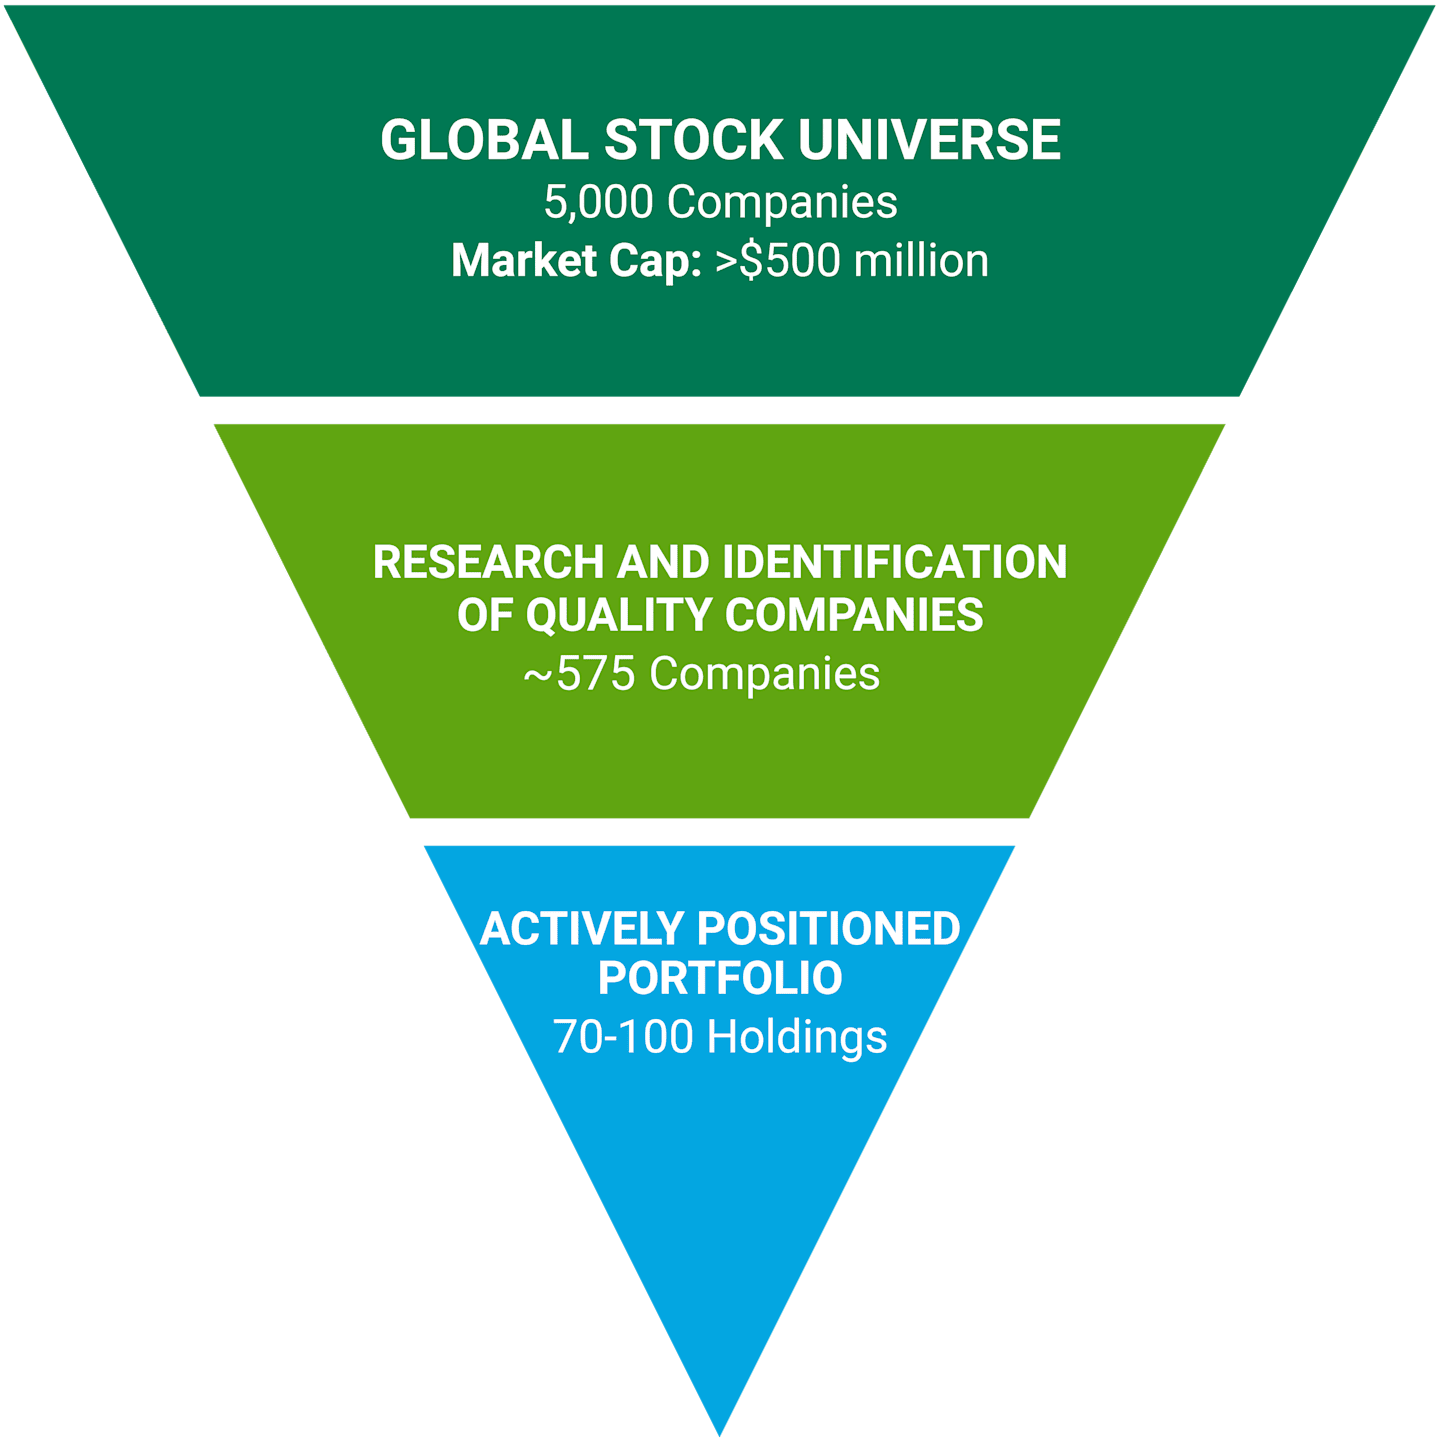 Global Stock Universe: 5,000 companies, Market Cap >$500M. Research and Identification of quality companies: 550 companies. Actively Positioned Portfolio: 70-100 holdings.